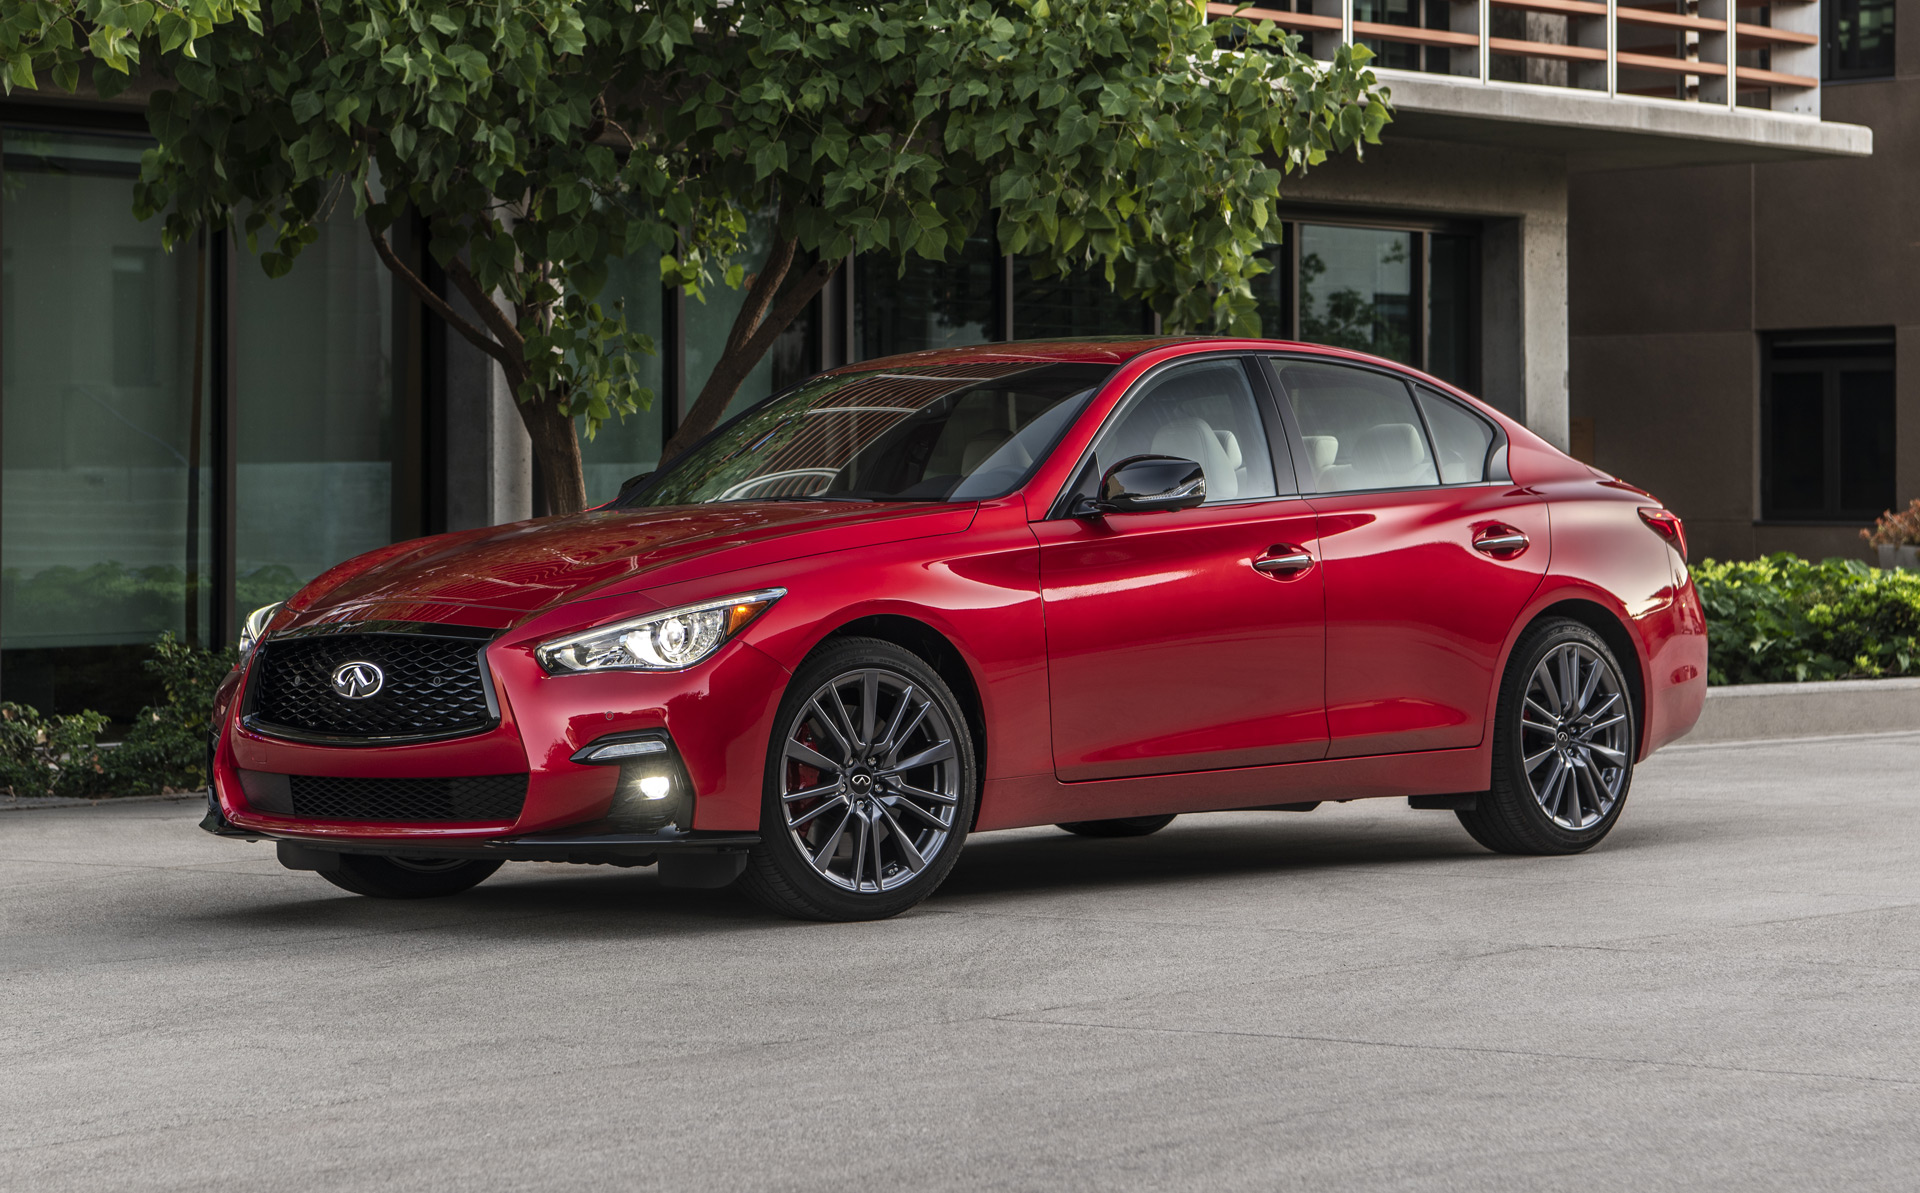 2023 Infiniti Q50 soldiers on with small price rise